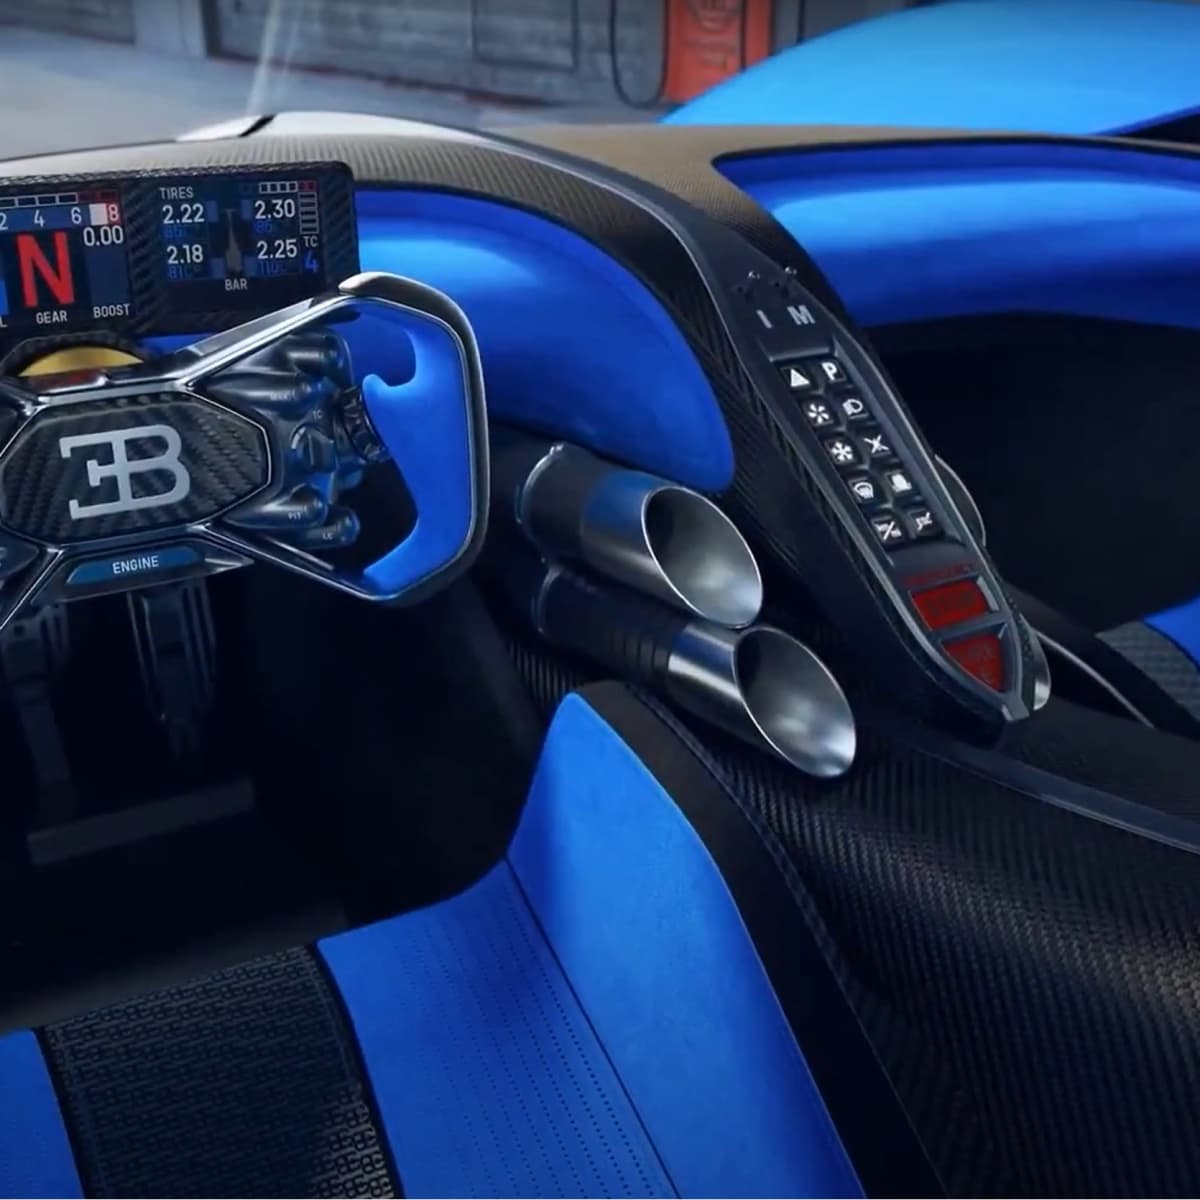 This $4.7 million racer will likely be Bugatti's last gas-powered